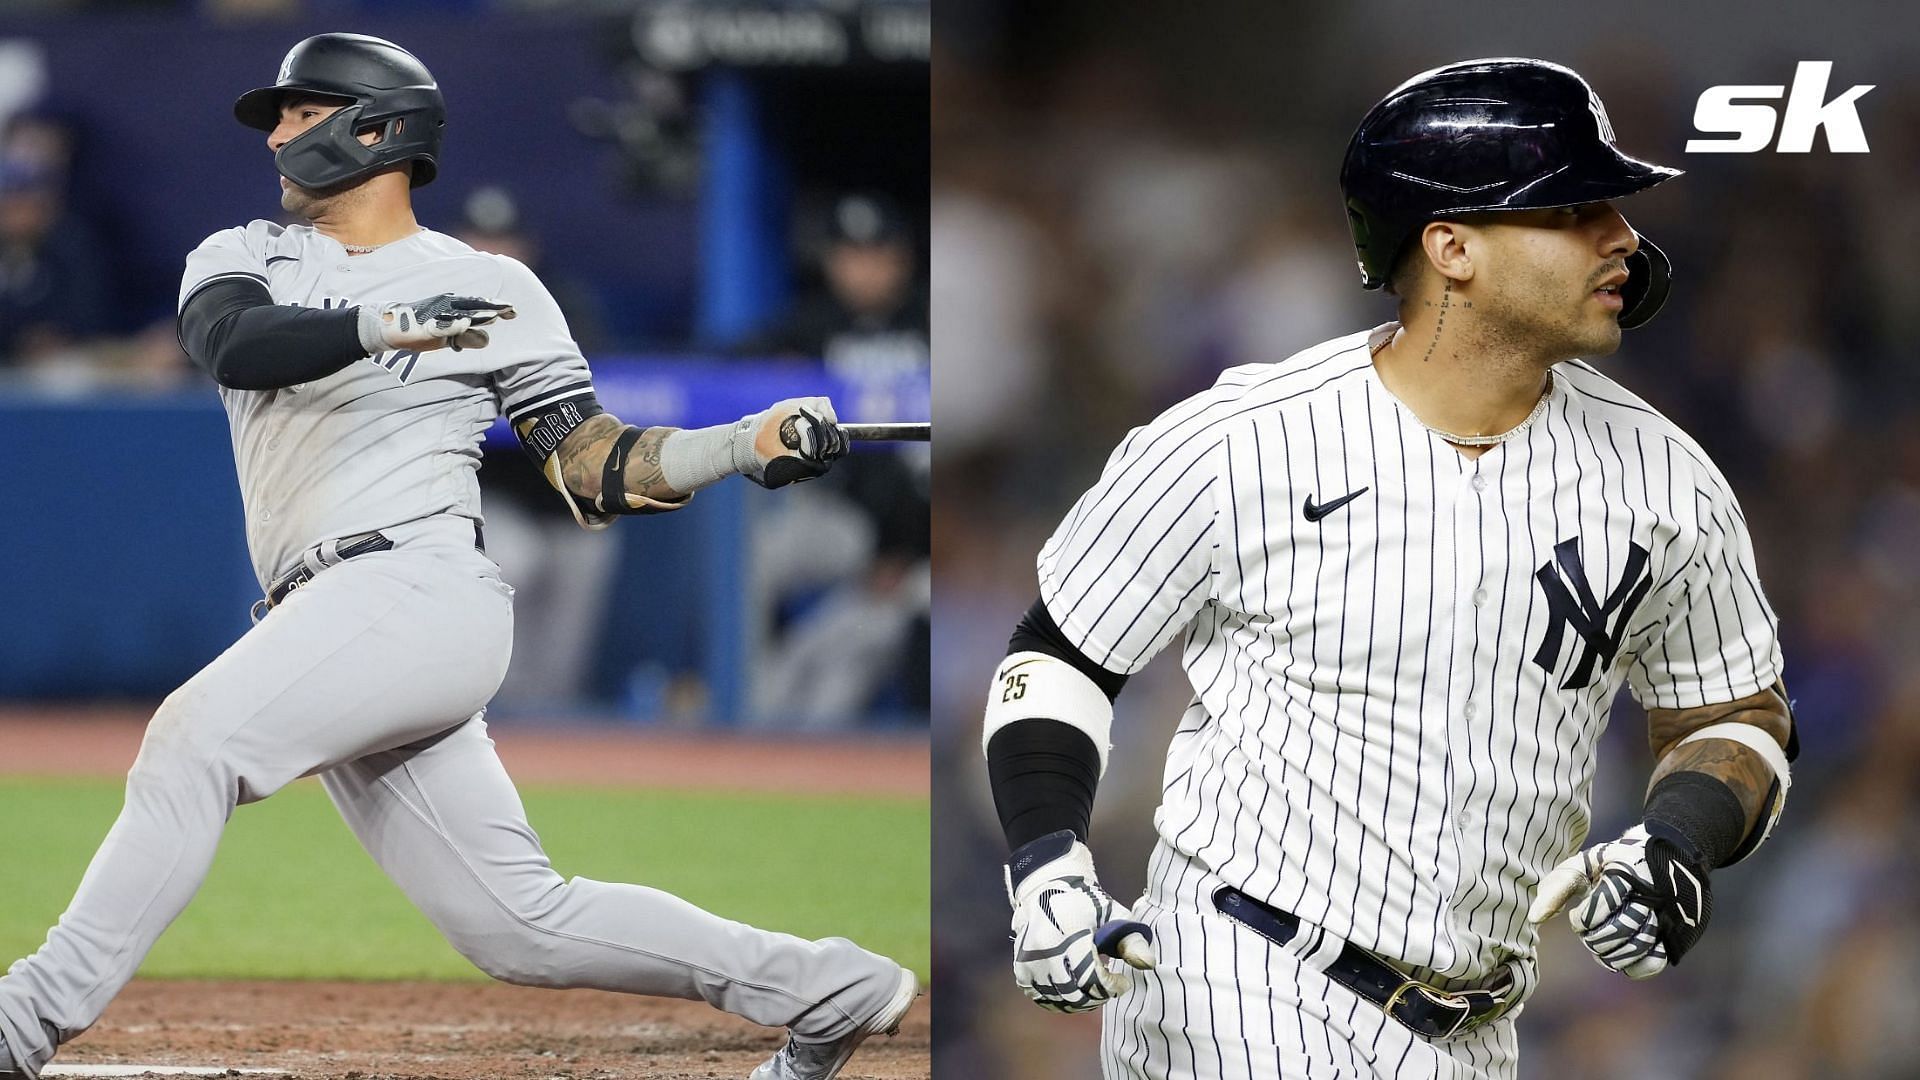 Gleyber Torres could provide managers with extreme value in the middle of their fantasy baseball drafts